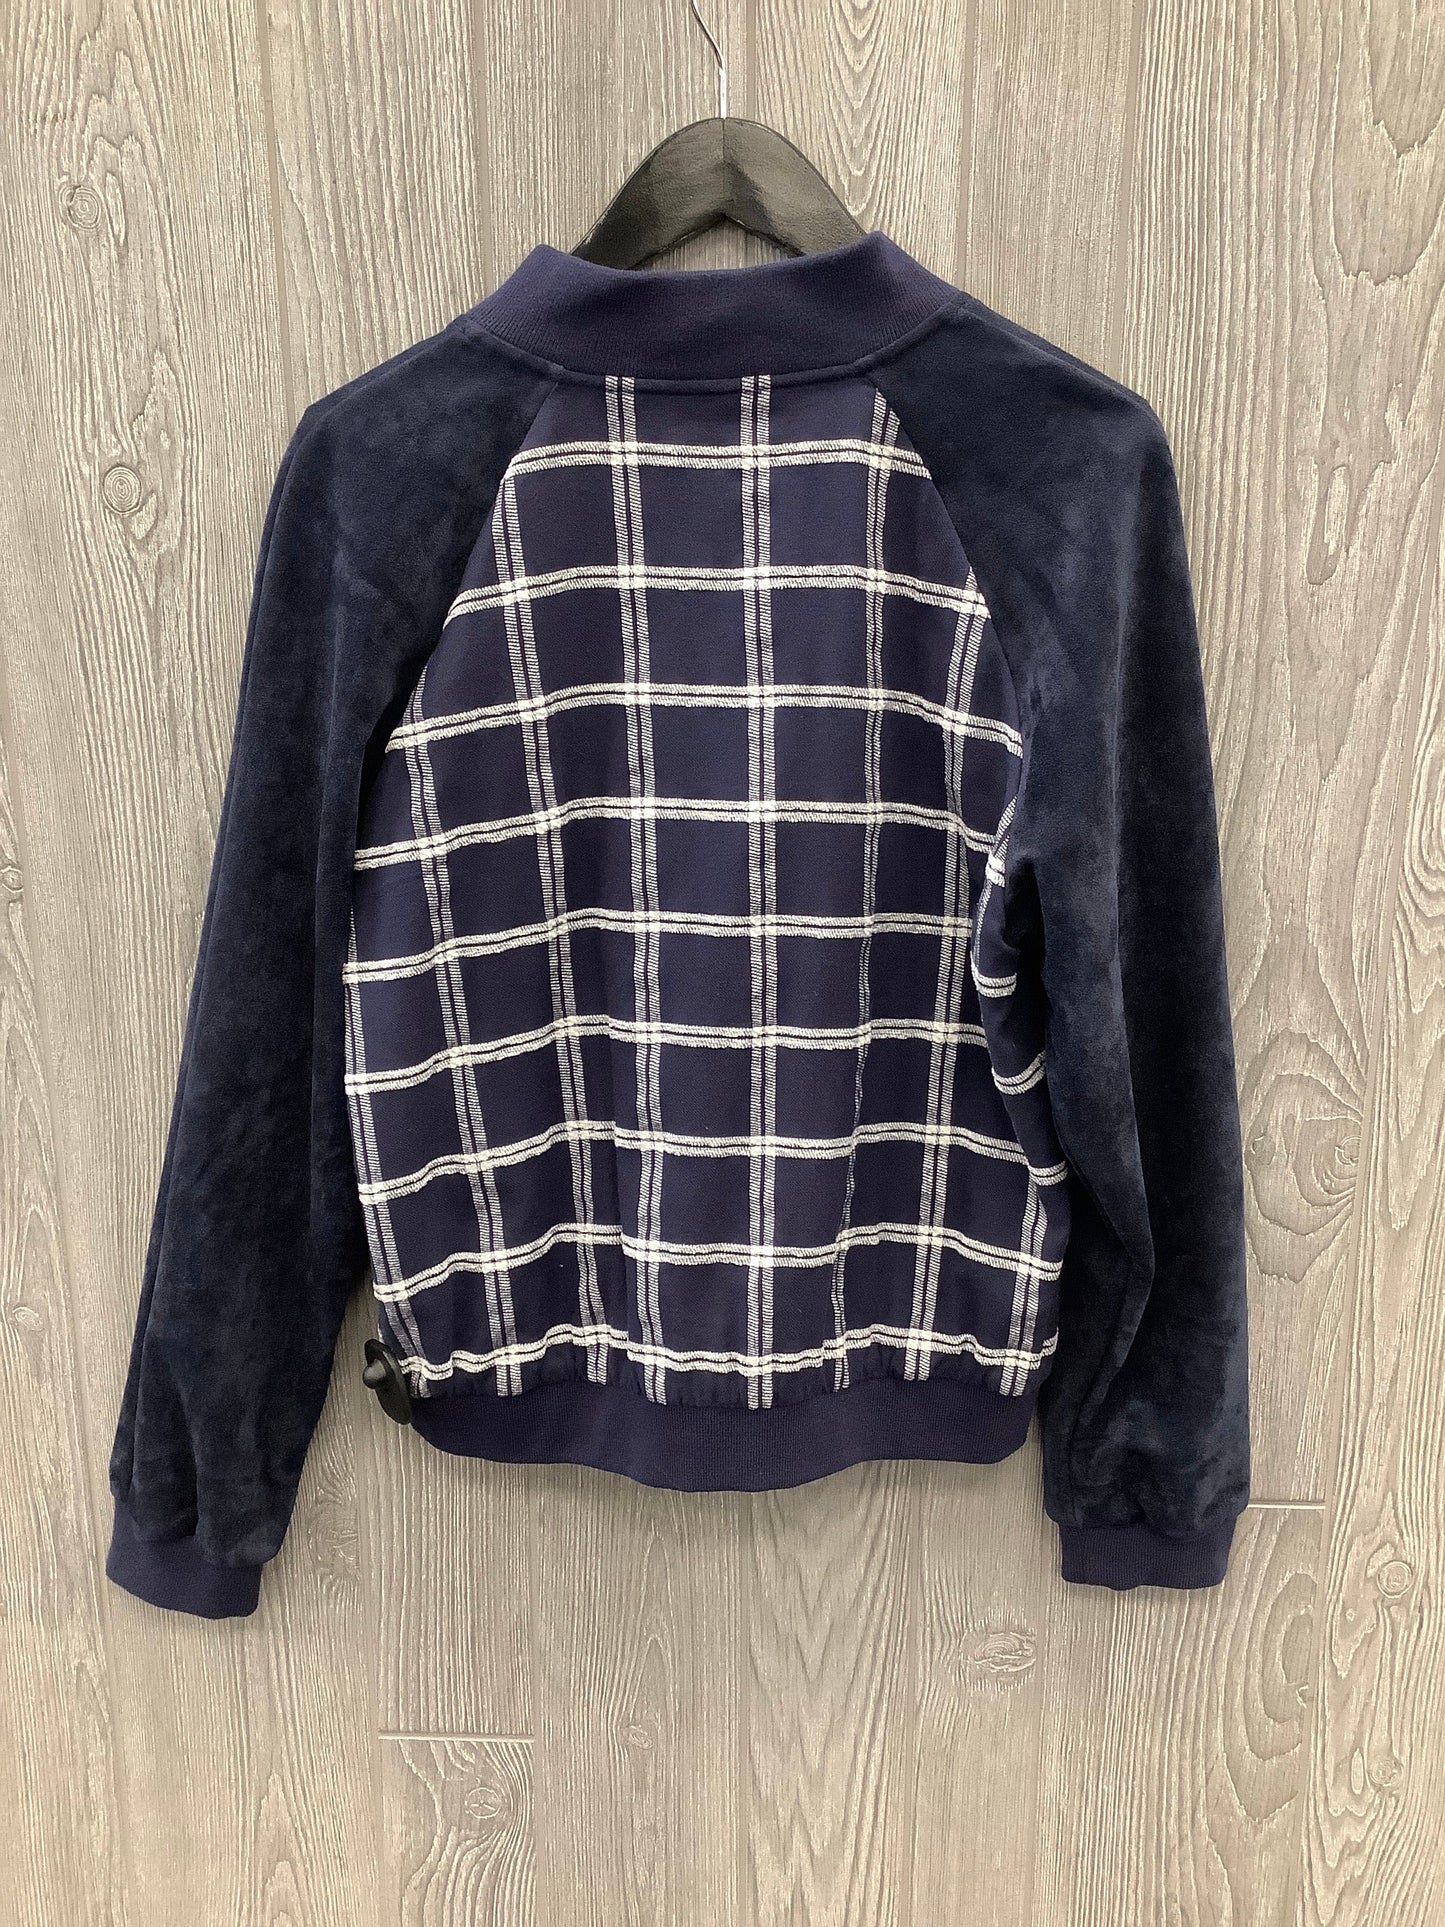 Jacket Other By A New Day  Size: Xl